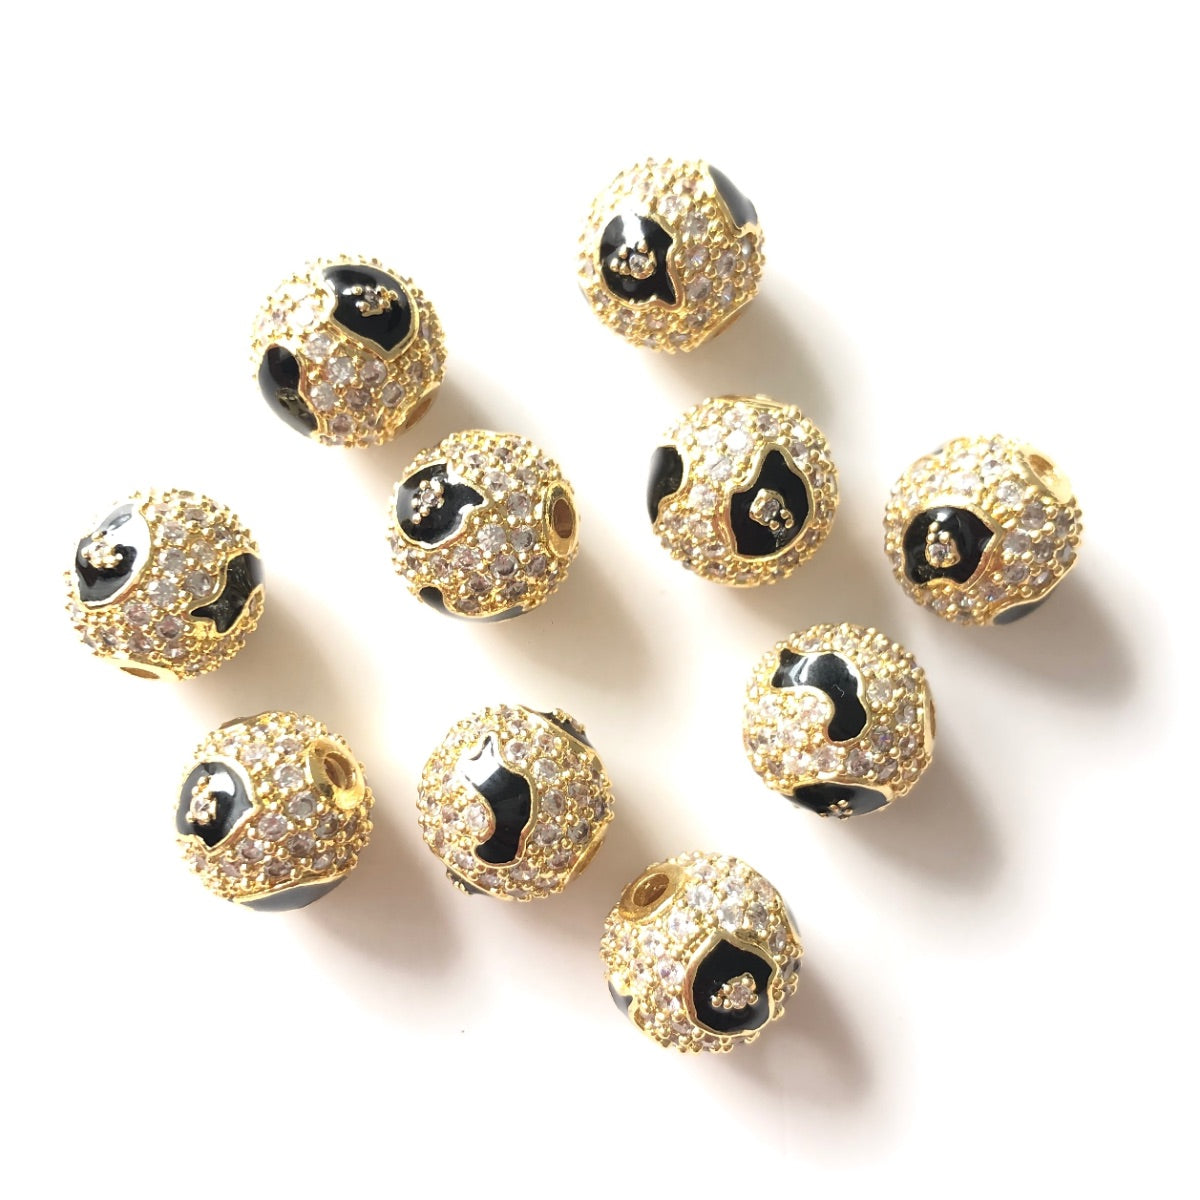 10-20-50pcs/lot 10mm Black Leopard Print Pattern CZ Paved Ball Spacers Beads Gold CZ Paved Spacers 10mm Beads Ball Beads Leopard Printed New Spacers Arrivals Charms Beads Beyond